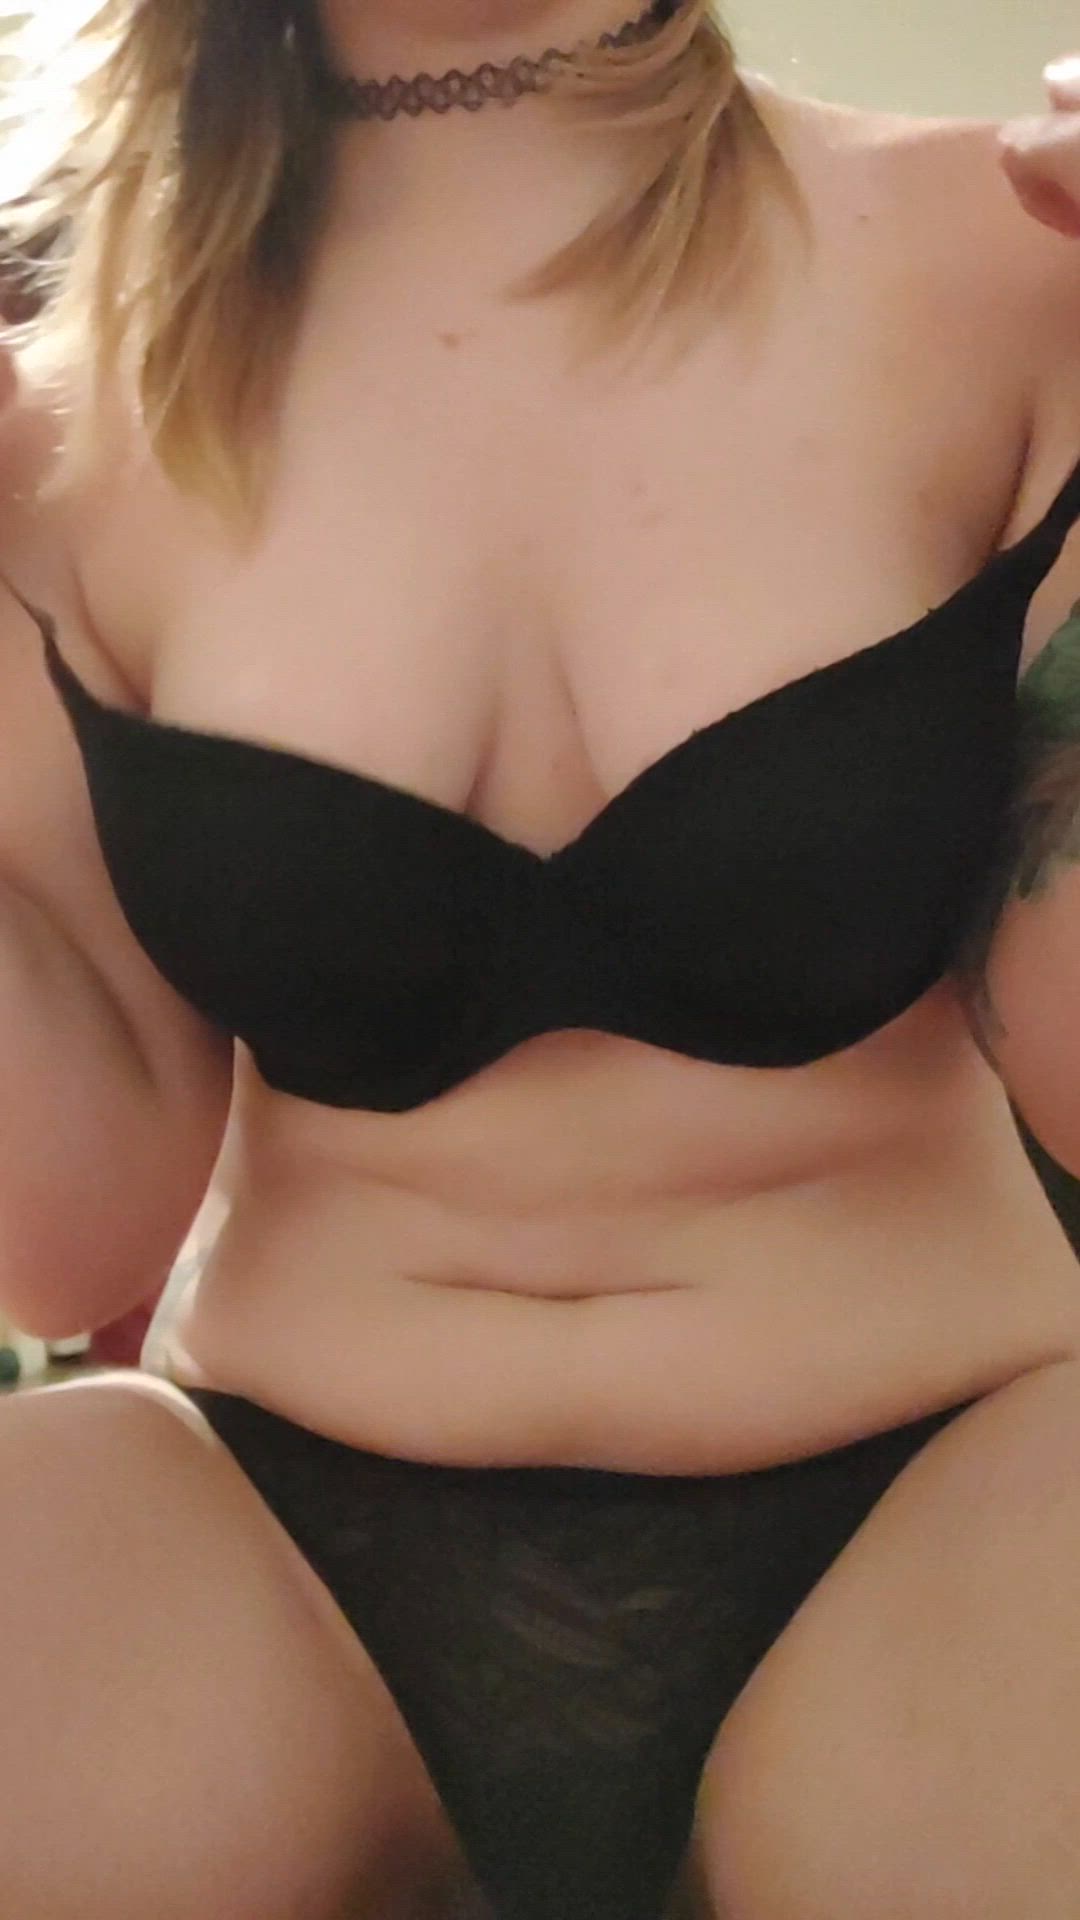 Tits porn video with onlyfans model taffycat <strong>@taffycat</strong>